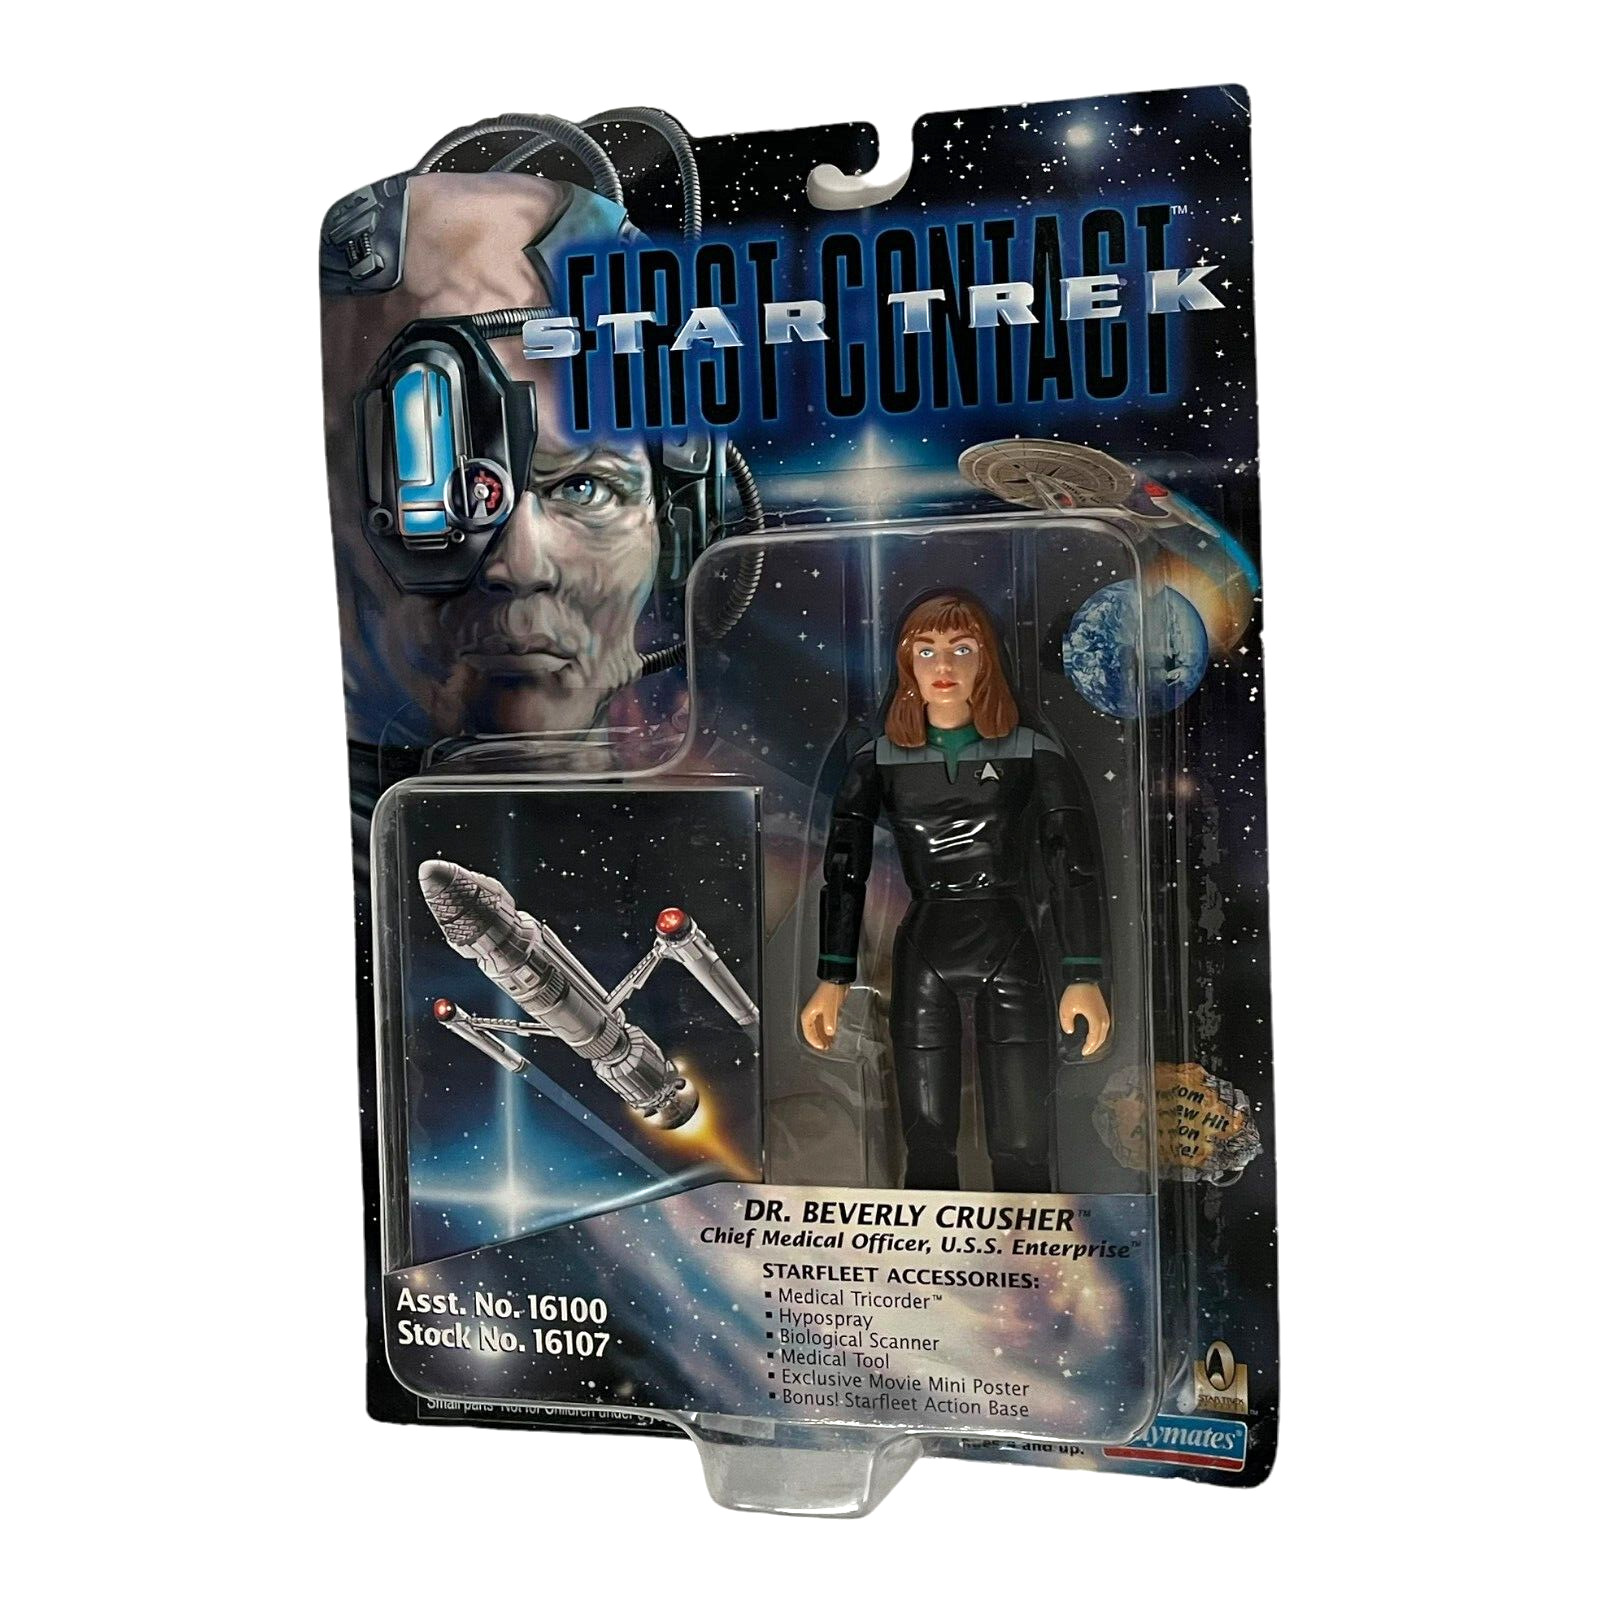 Star Trek First Contact Dr. Beverly Crusher 5 Inch Action Figure 1996 Playmates